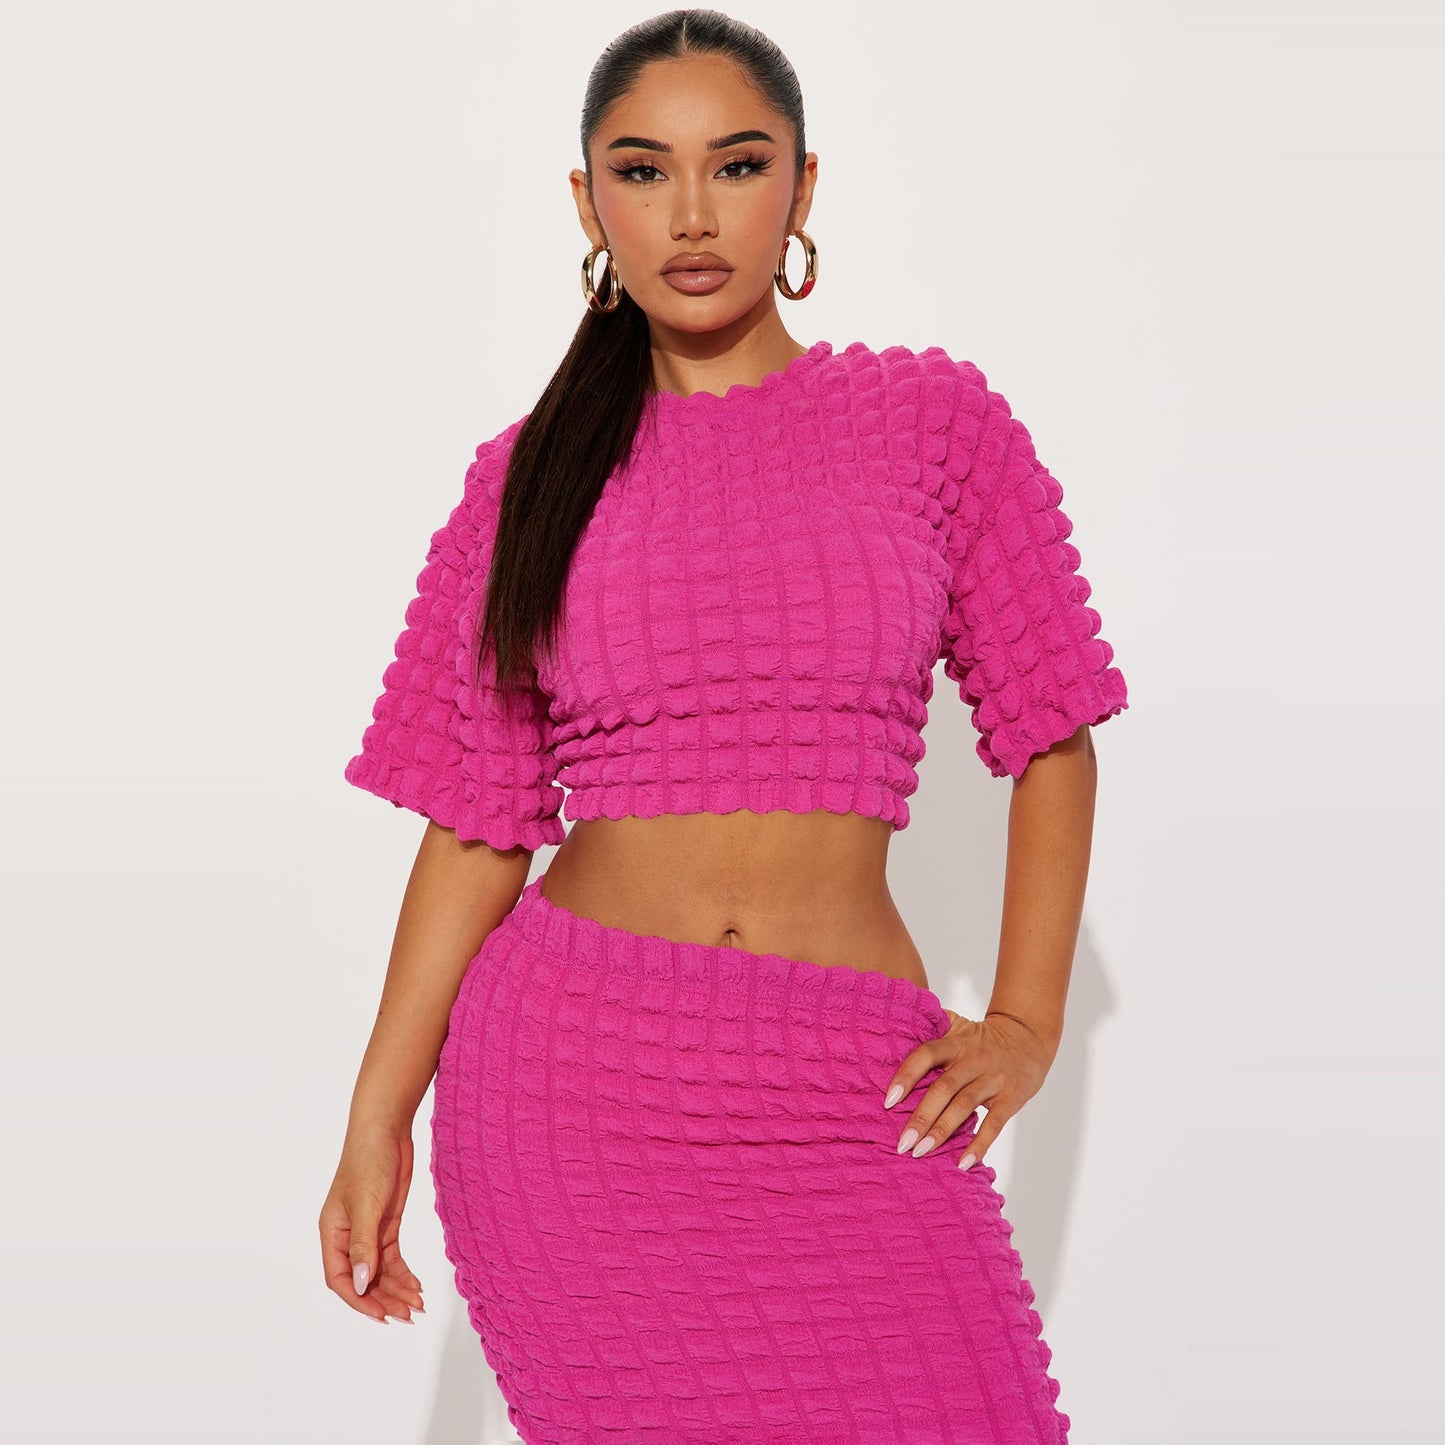 Half Sleeve Cropped Top And Maxi Skirt Sets